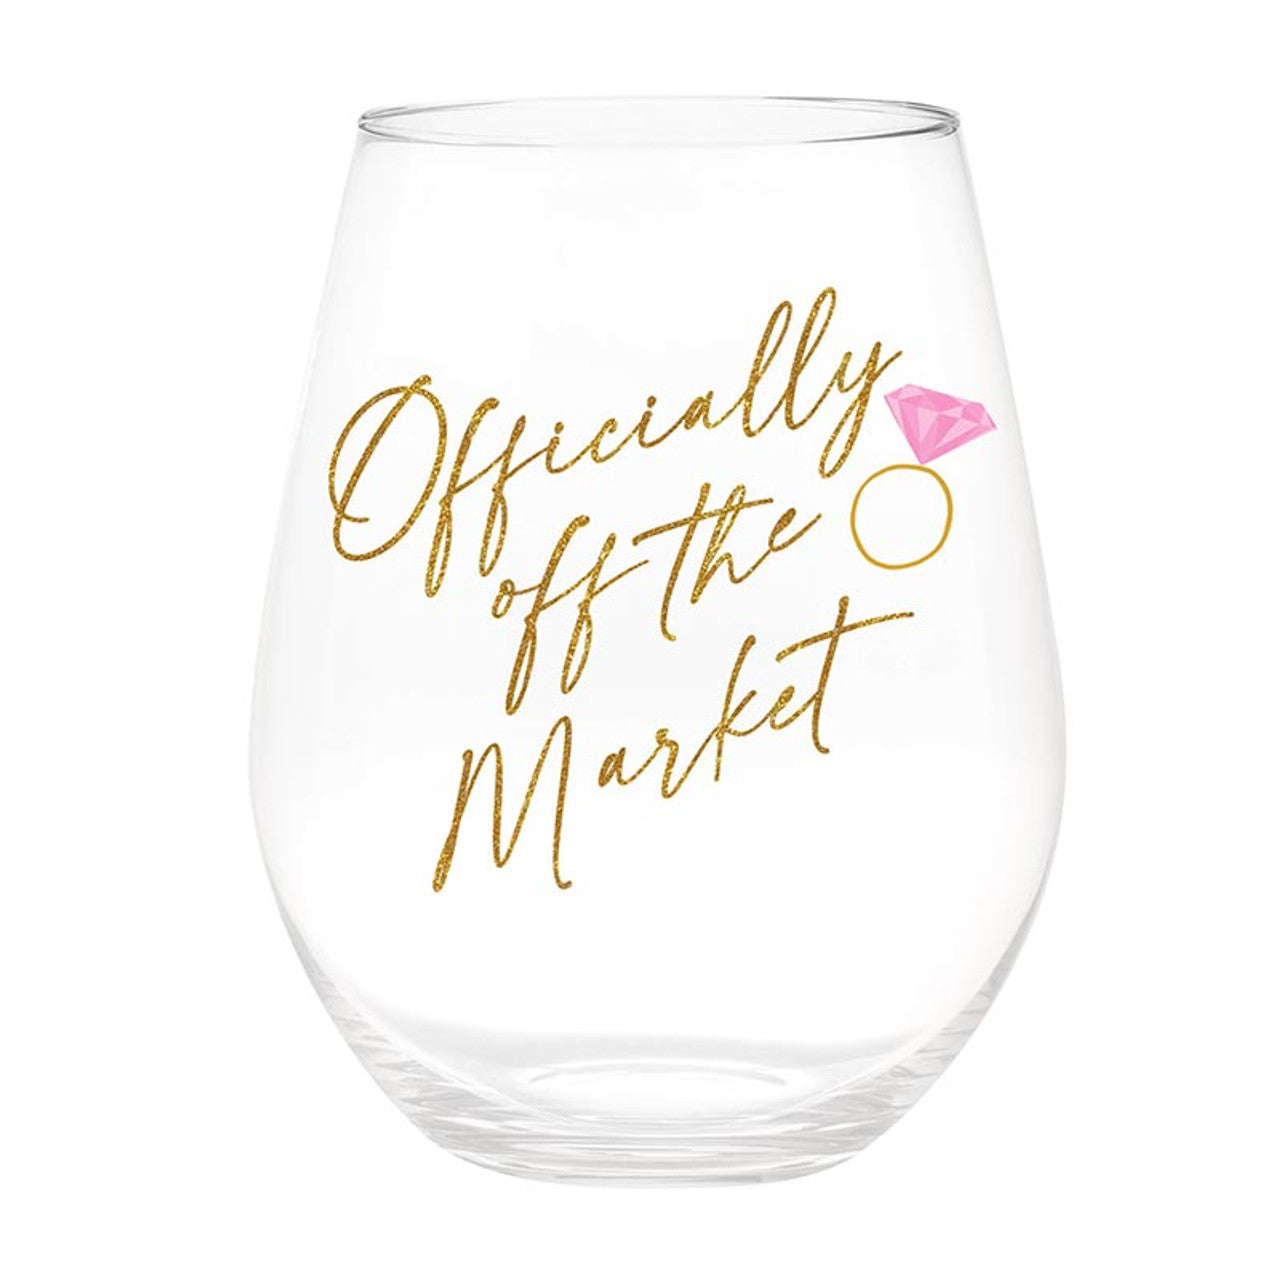 Jumbo Stemless Wine Glass - Officially off the Market